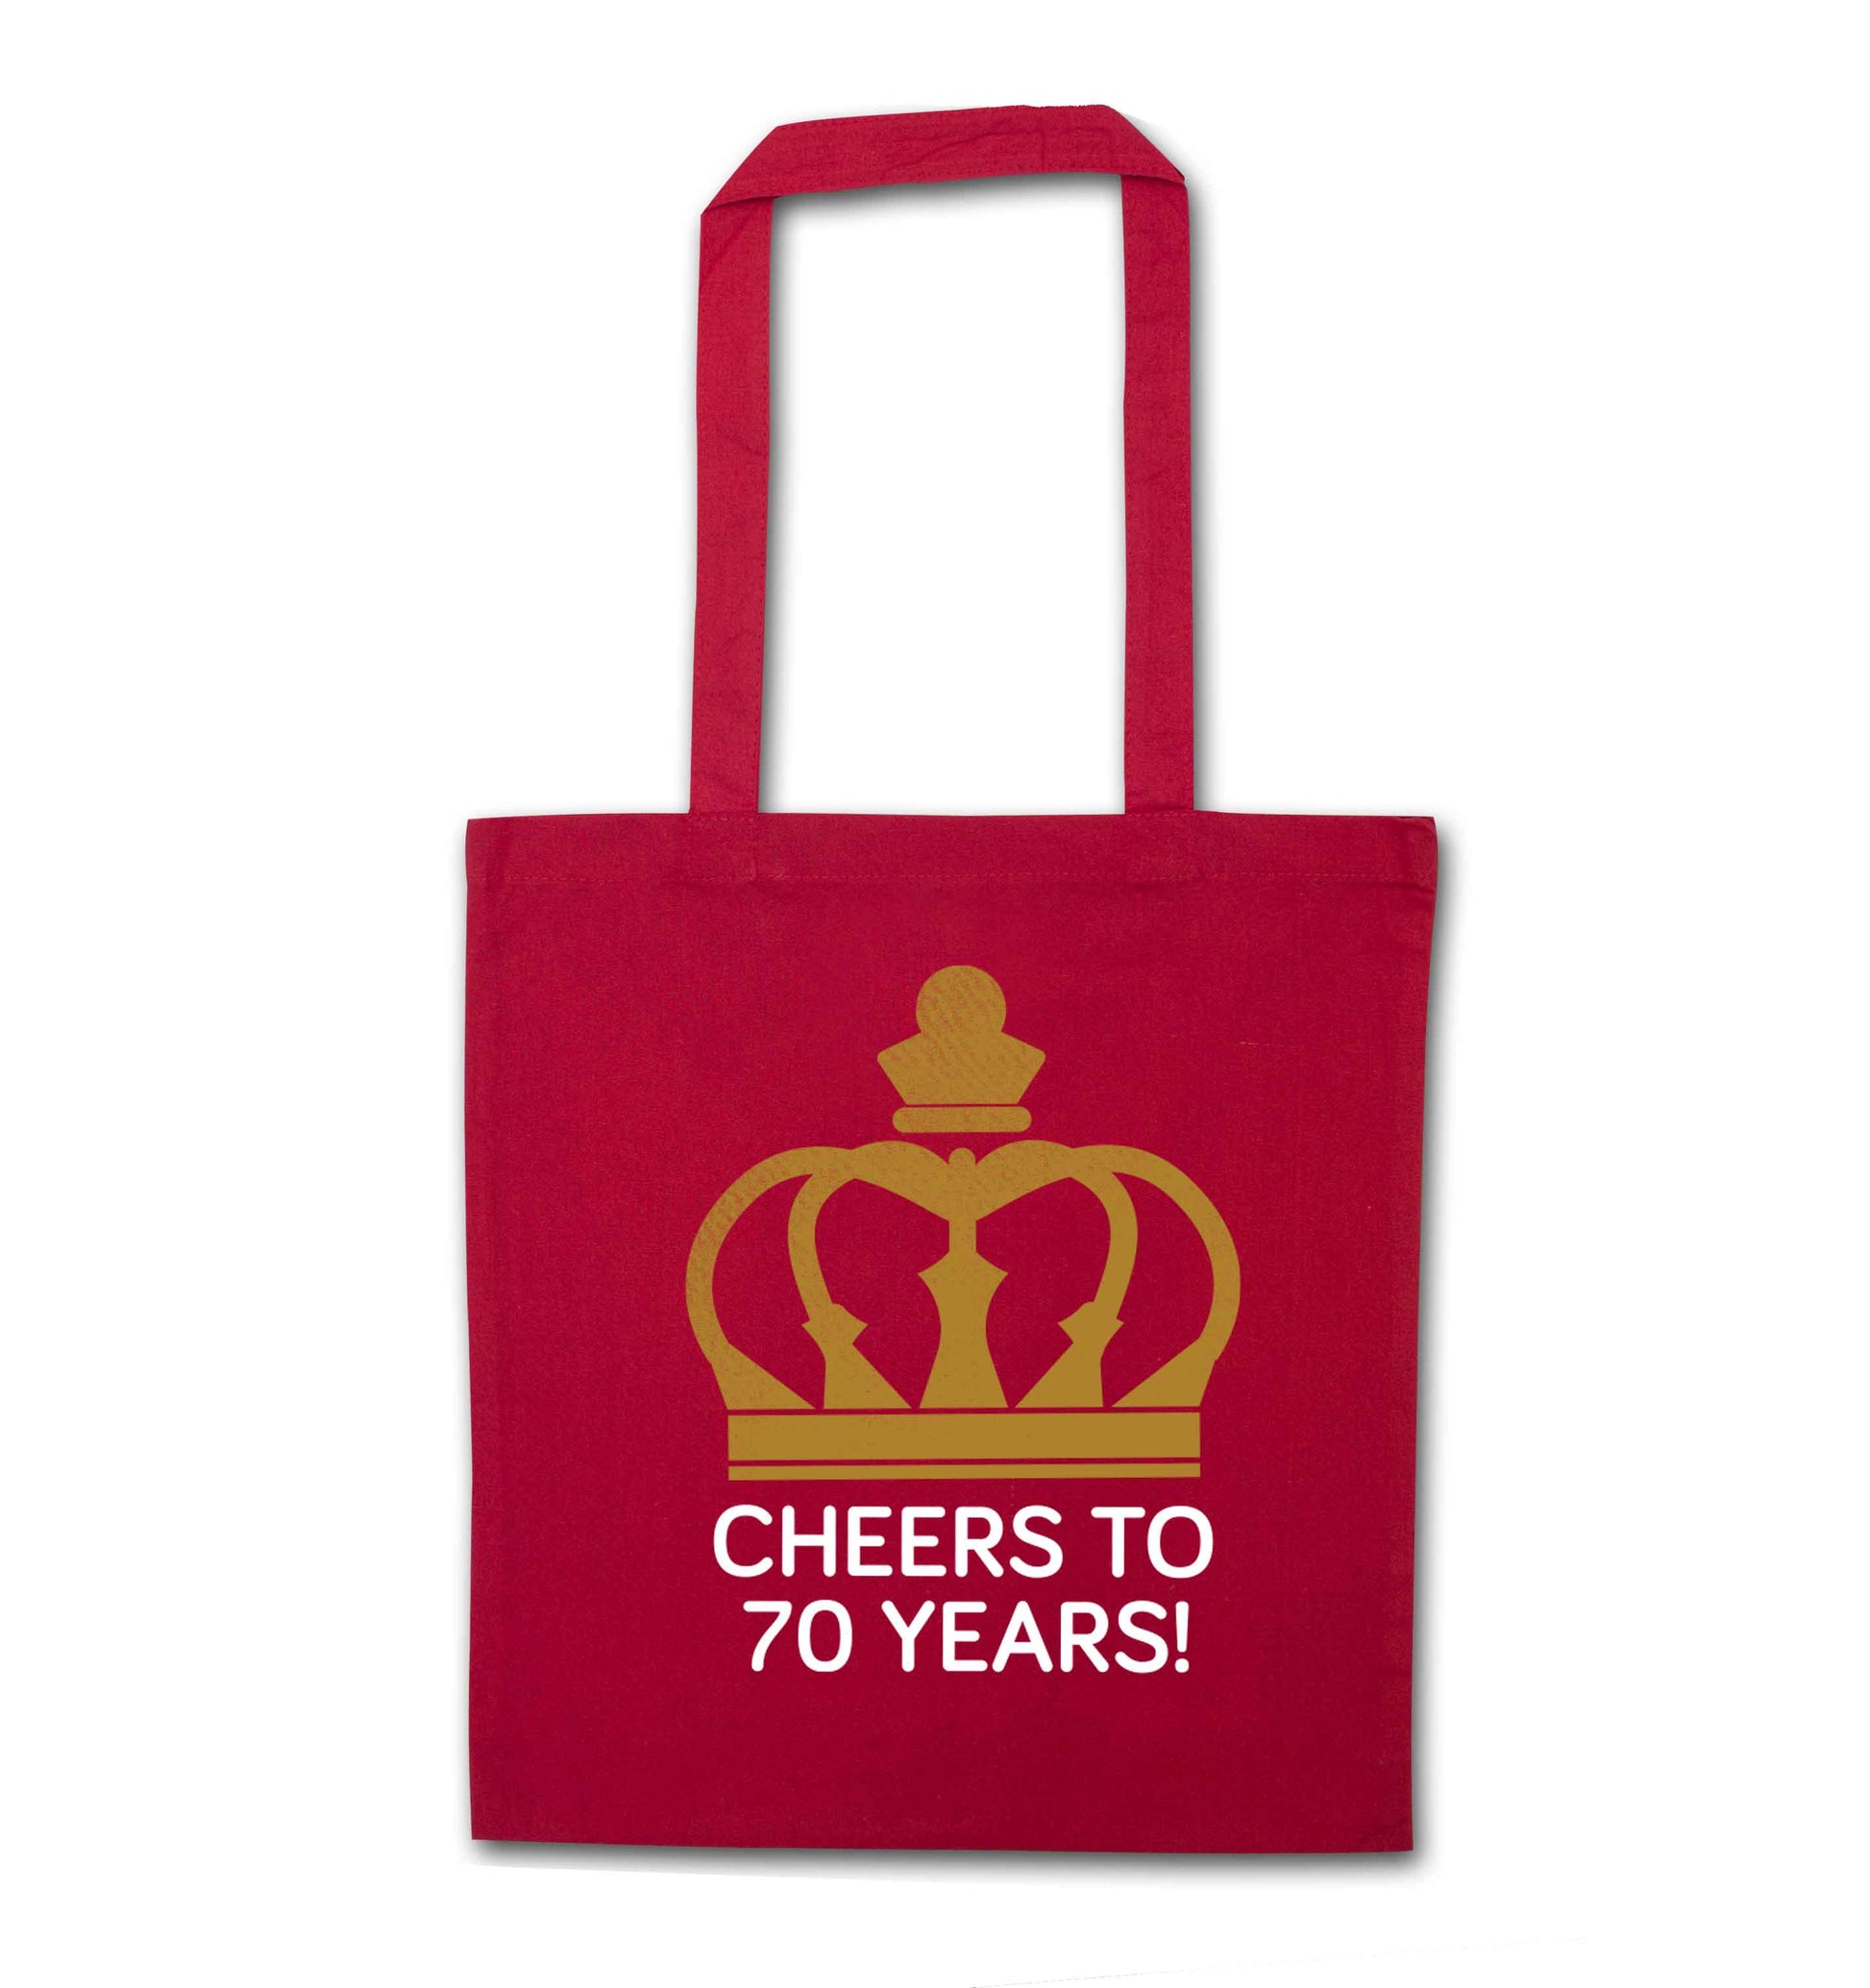 Cheers to 70 years! red tote bag